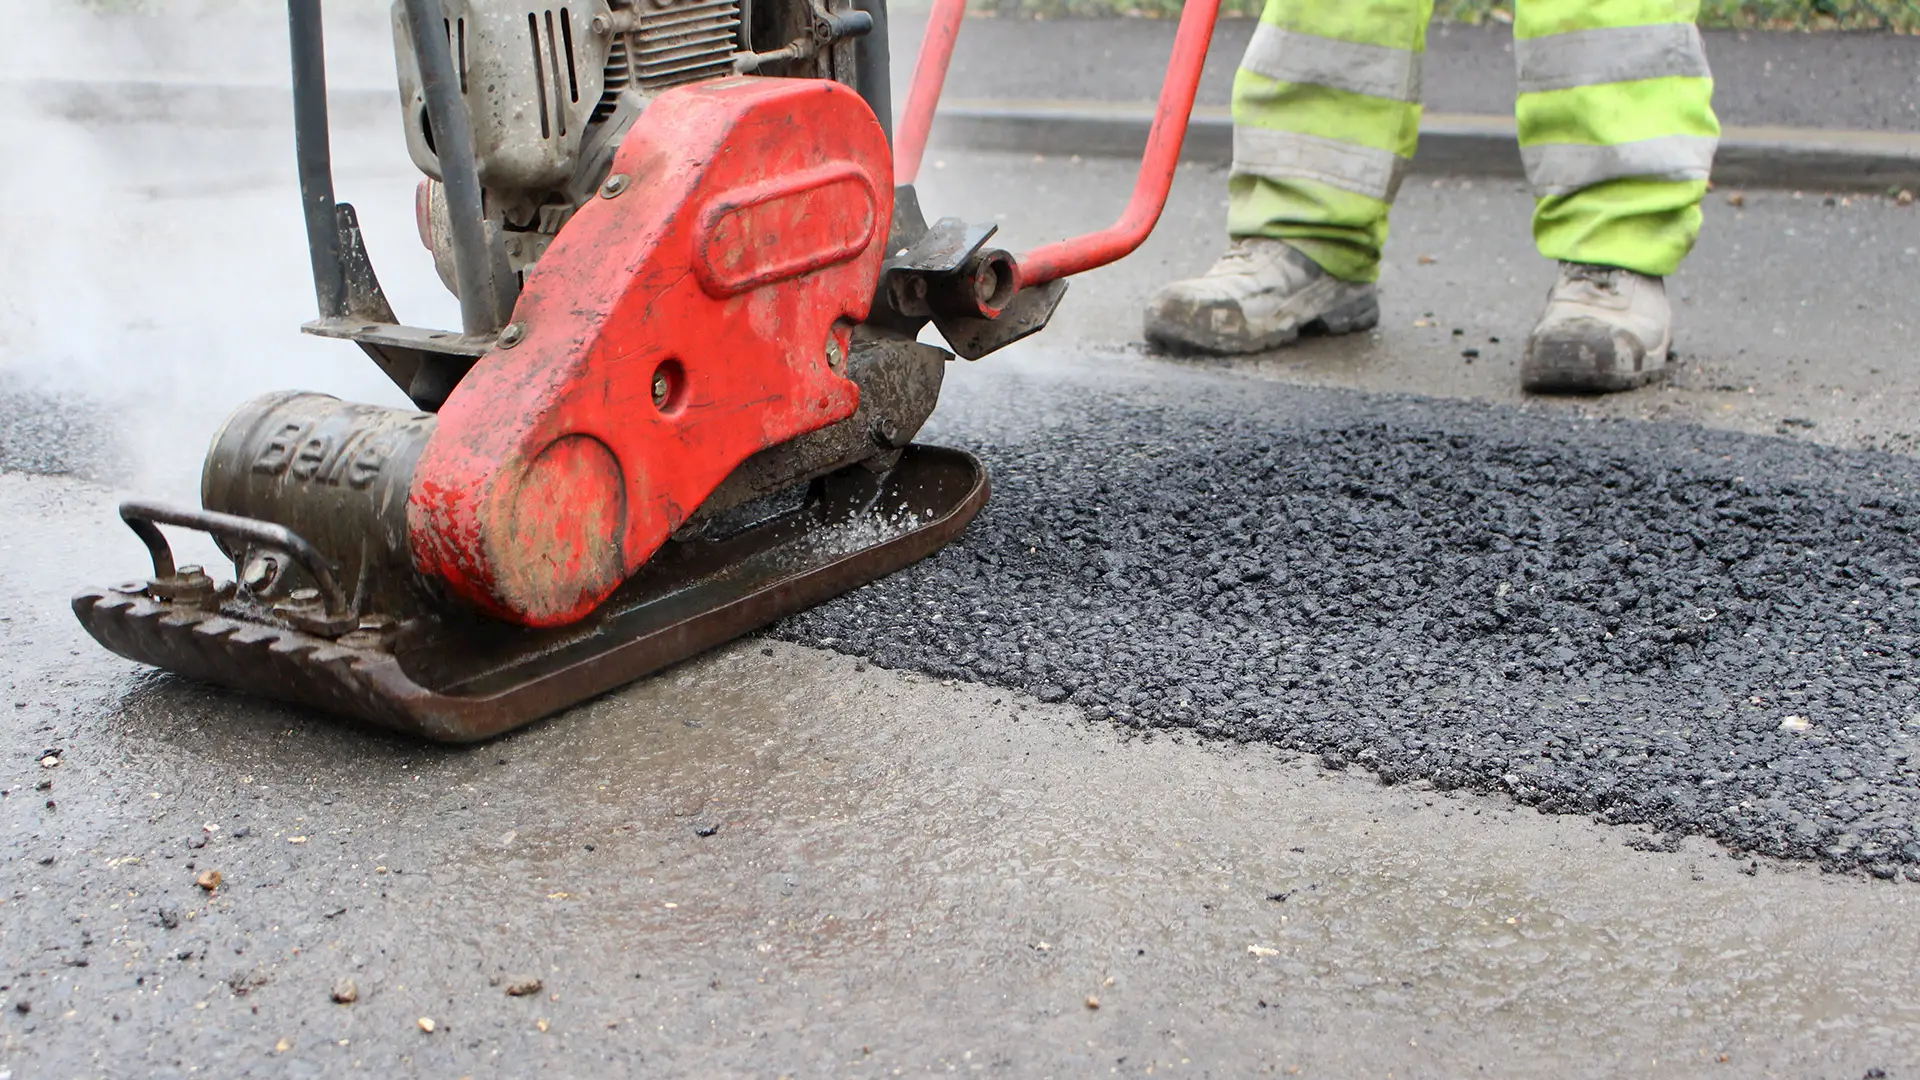 Experienced pothole repair contractors in Coventry